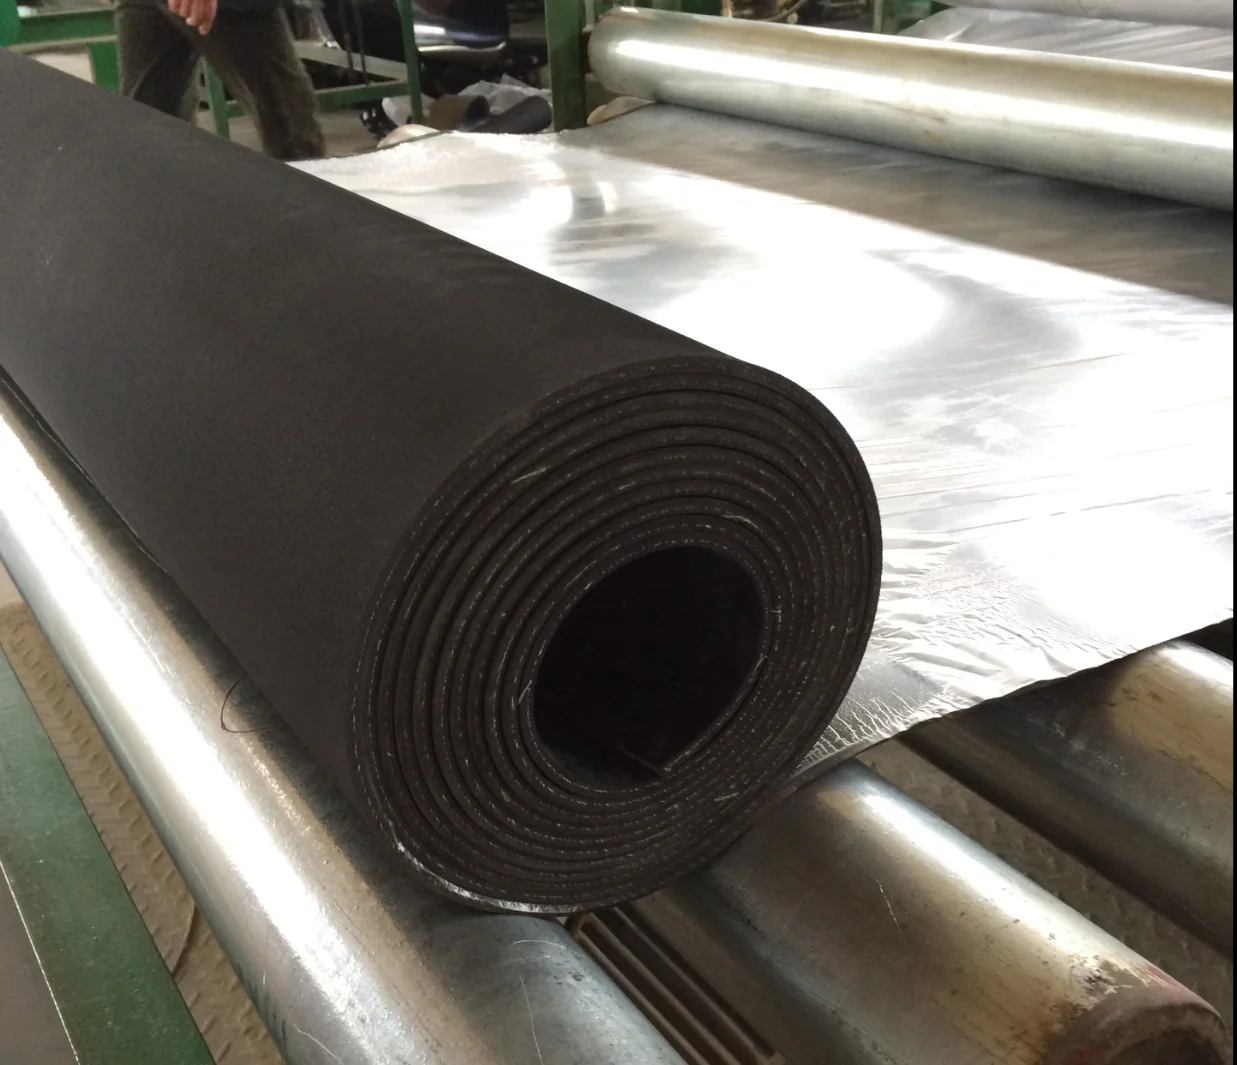 COYOUCO Silicone Rubber Sheet, High Temperature Sealing Material, Neoprene  Rubber Plate Roll, 200 x 200 mm, for Plumbing, DIY Material, 3 mm :  : DIY & Tools